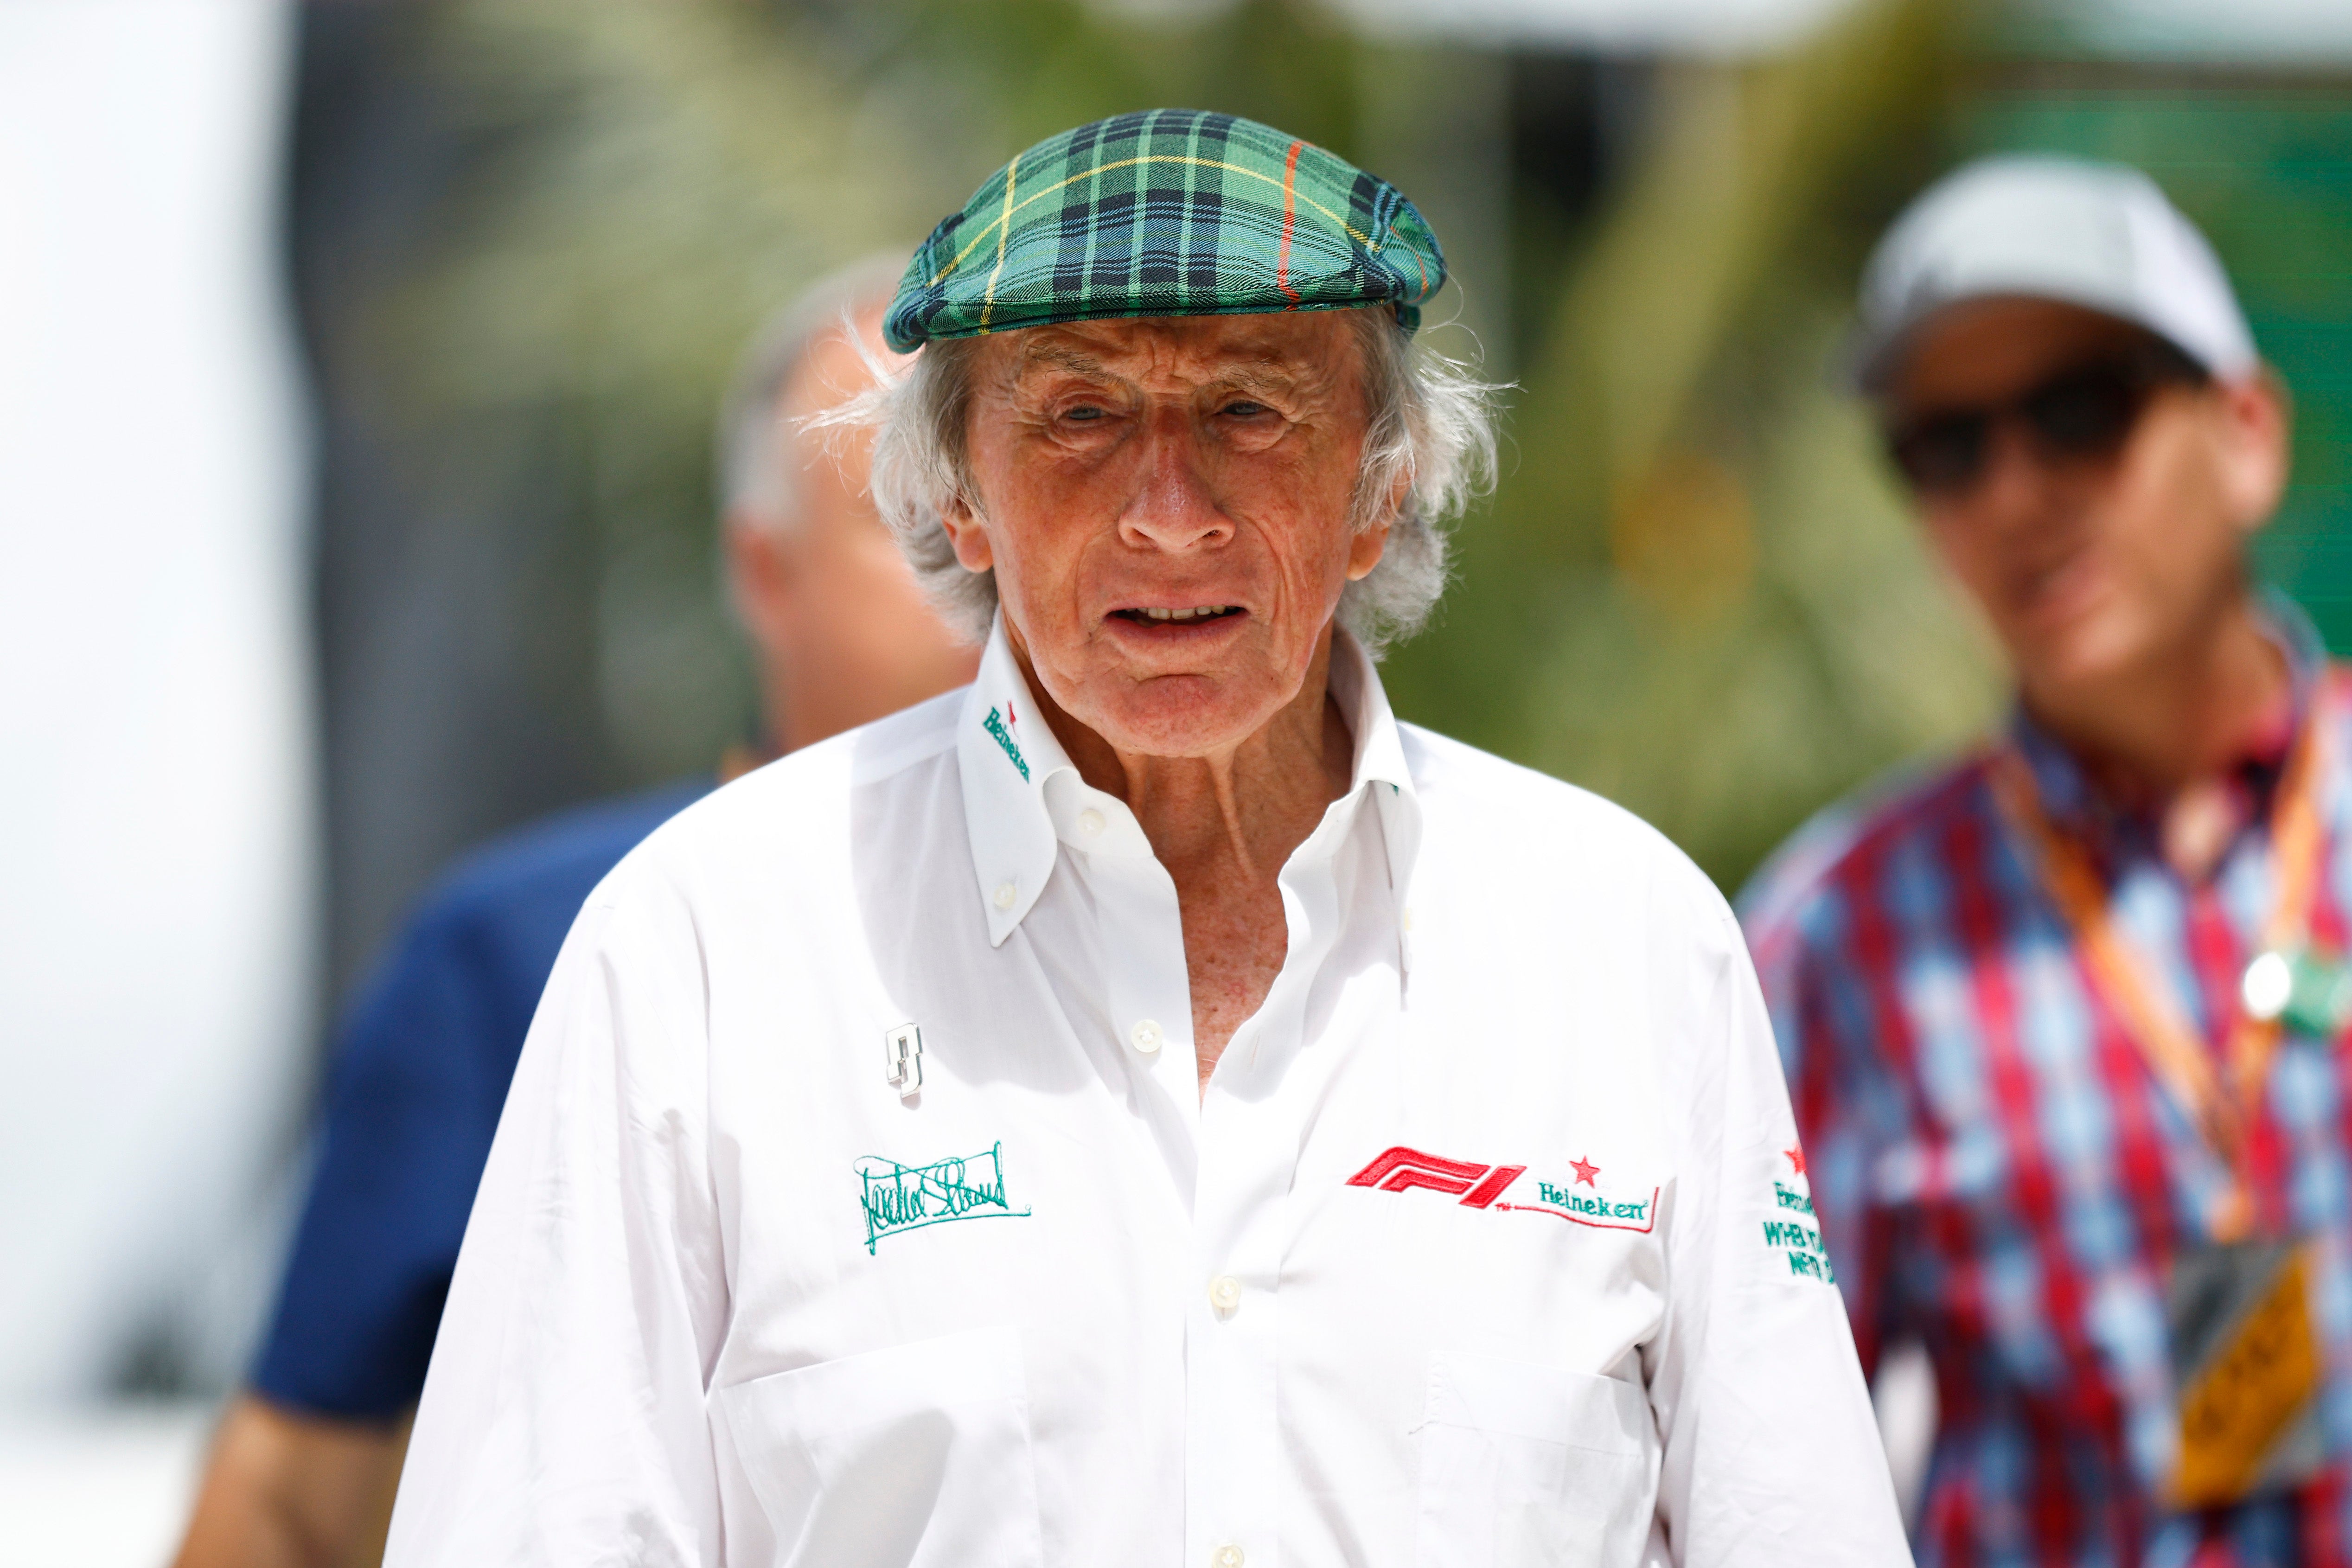 Jackie Stewart speaks openly and honestly about his life exclusively to The Independent